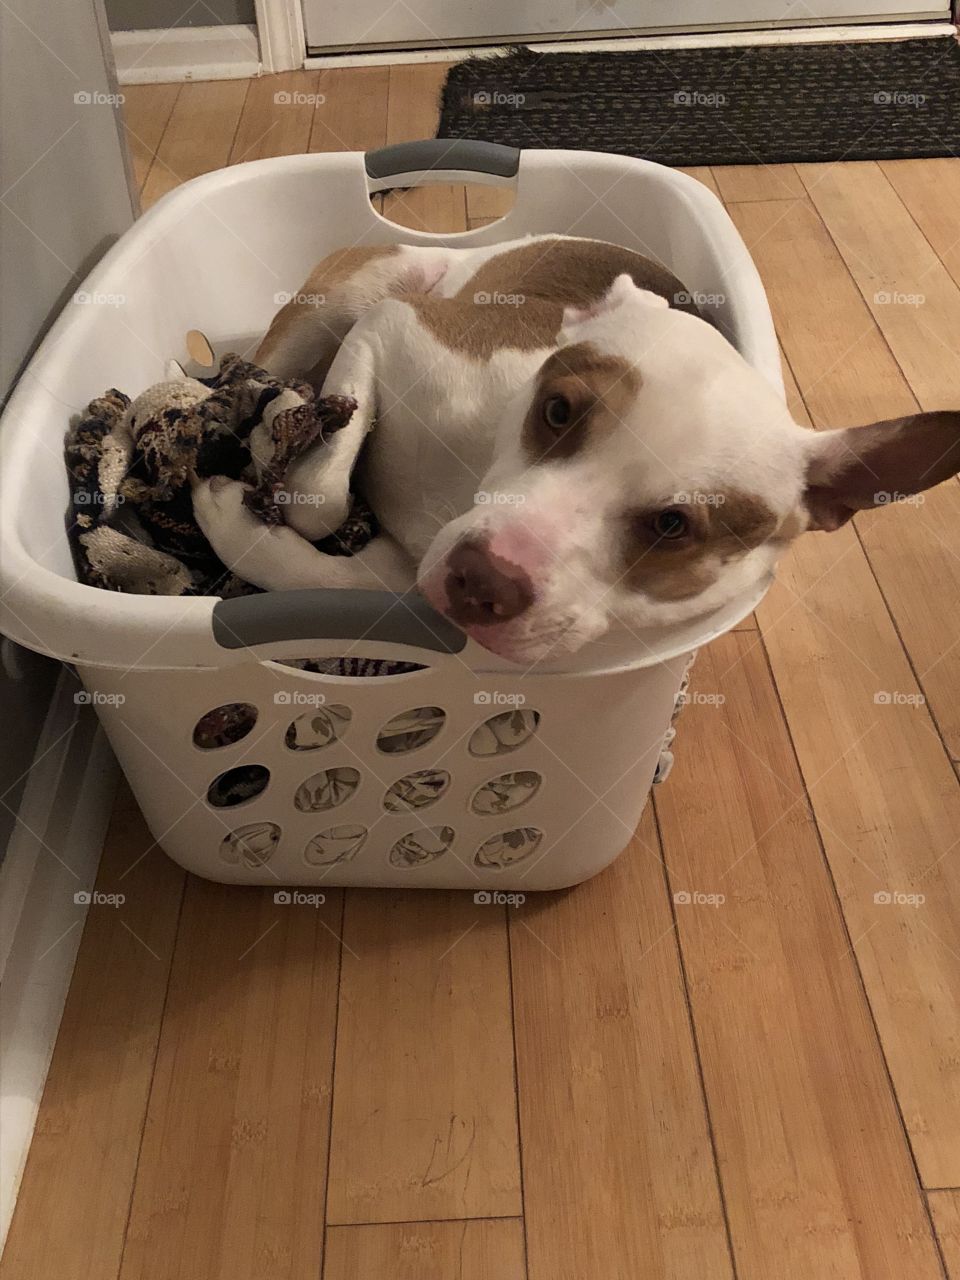 Mommy doesn’t mind if I borrow her laundry basket for a little shut eye